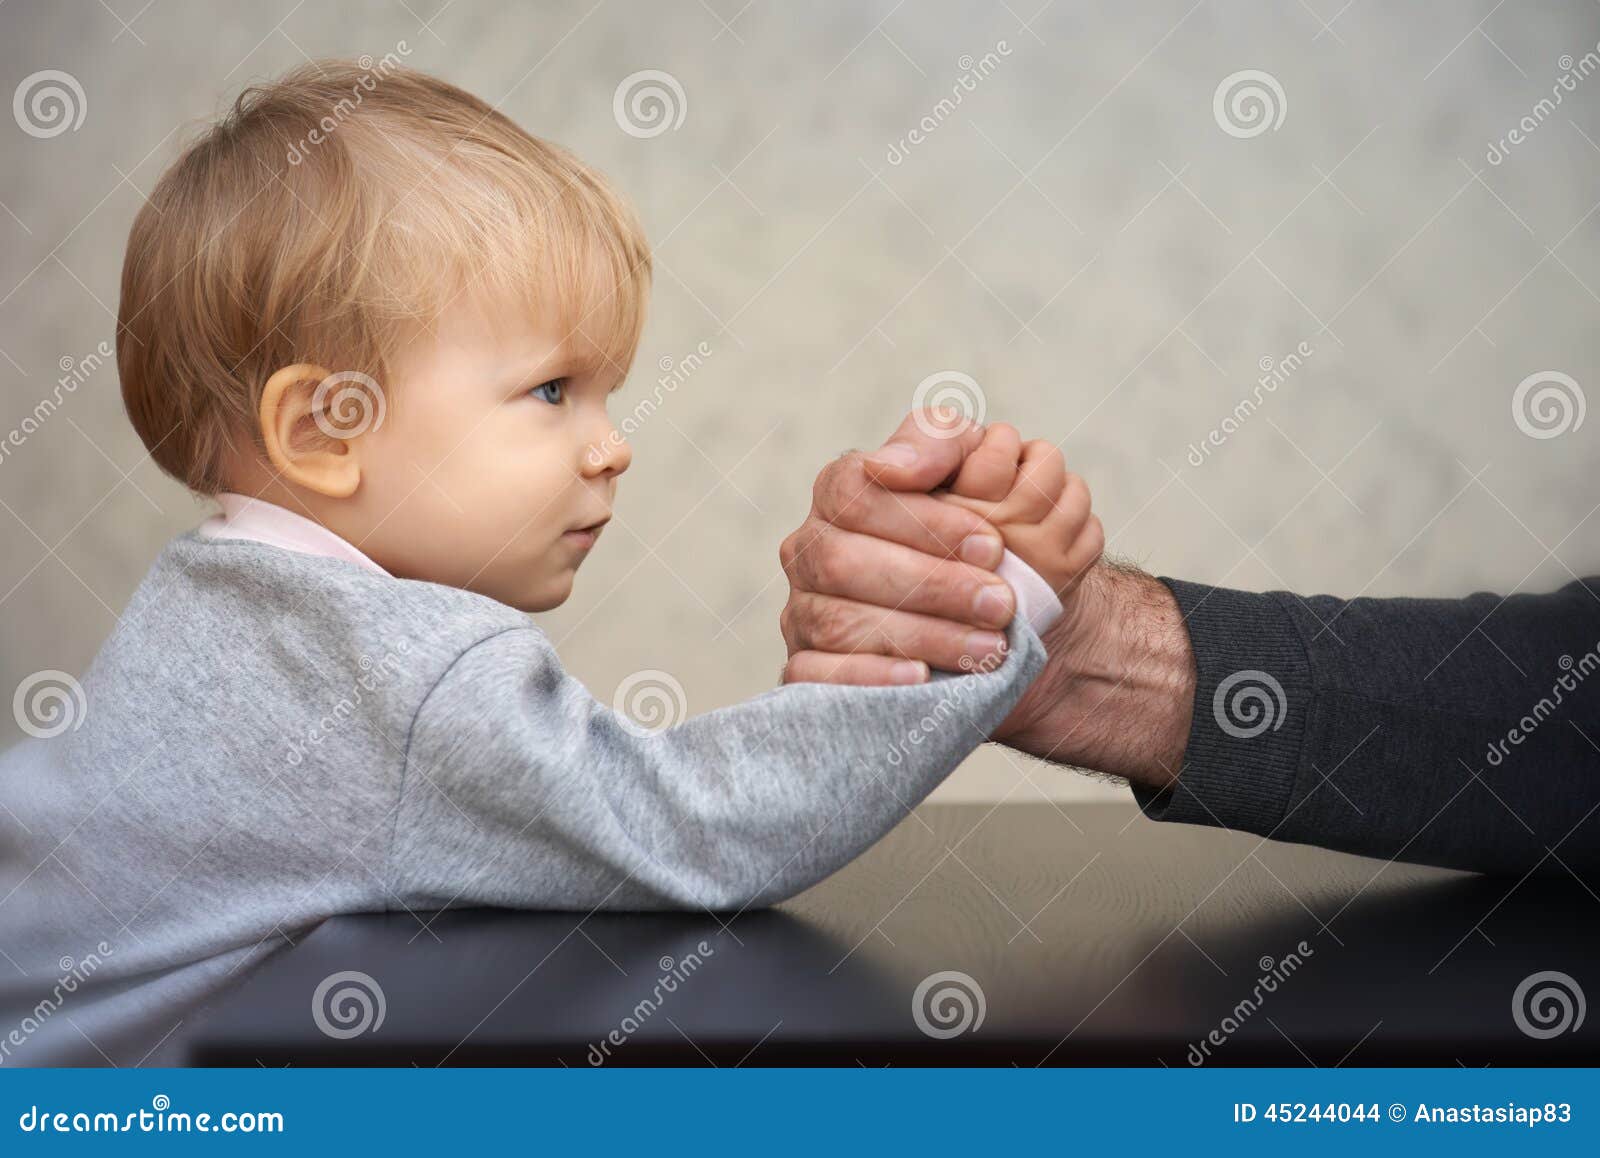 father and kid arm wrestling competition